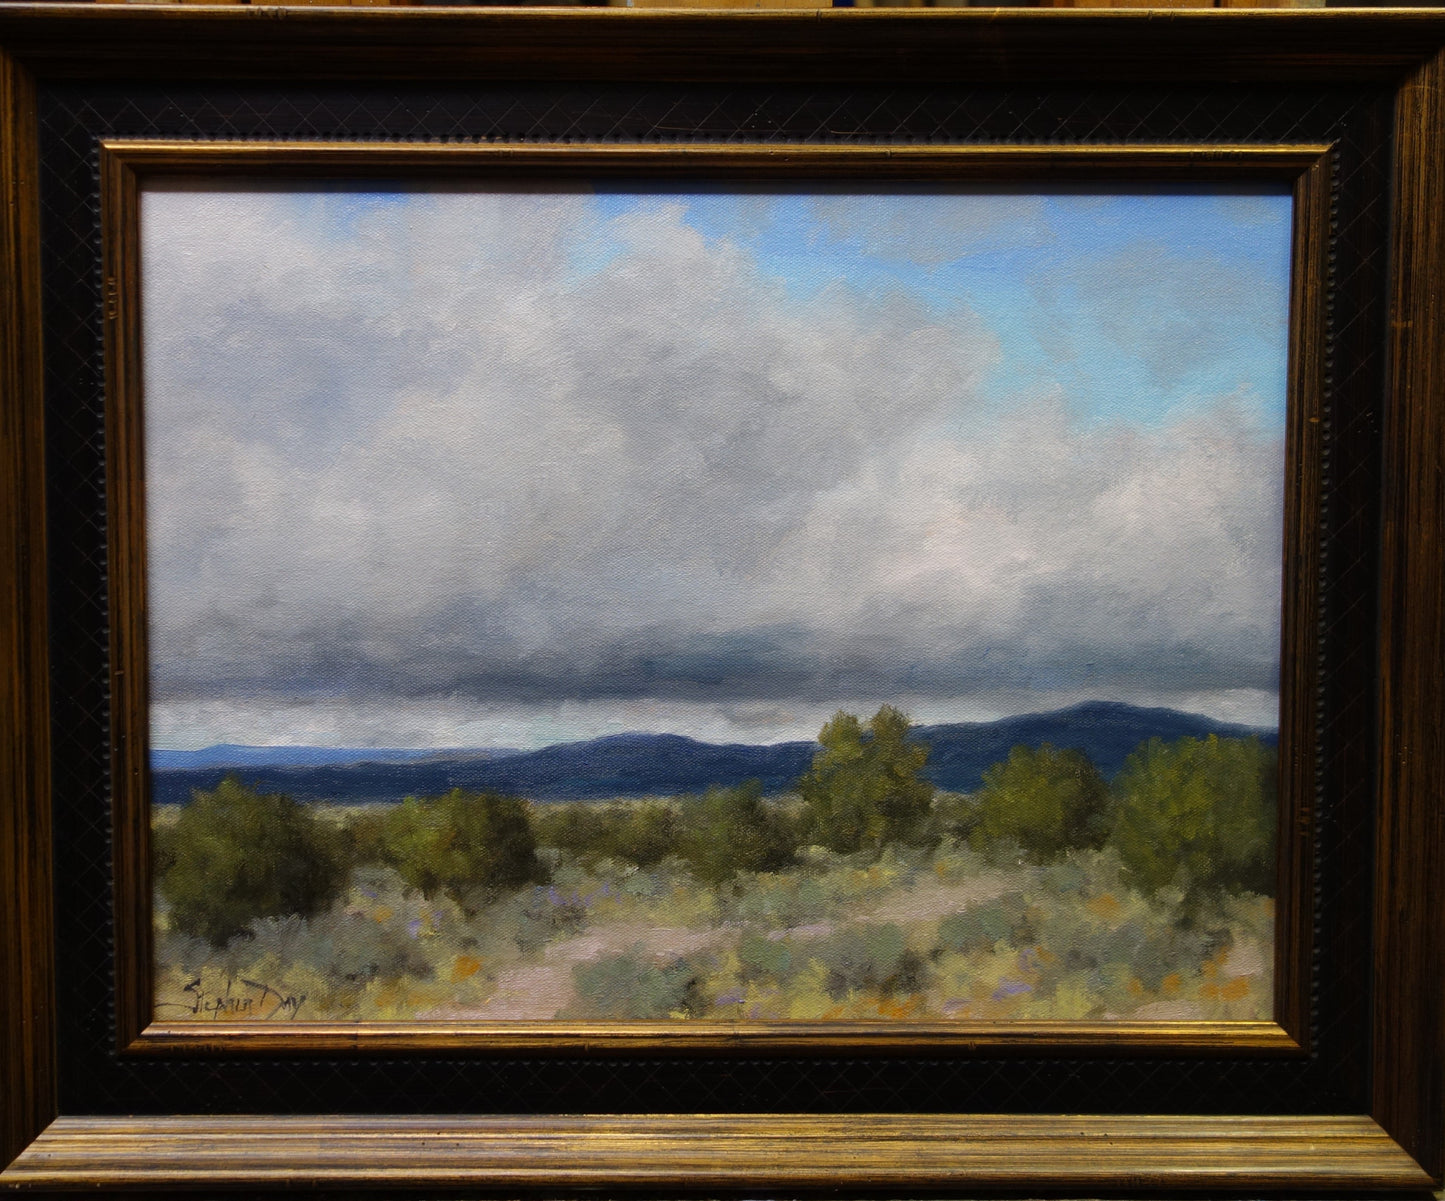 Cloud Shadow - New Mexico-Painting-Stephen Day-Sorrel Sky Gallery